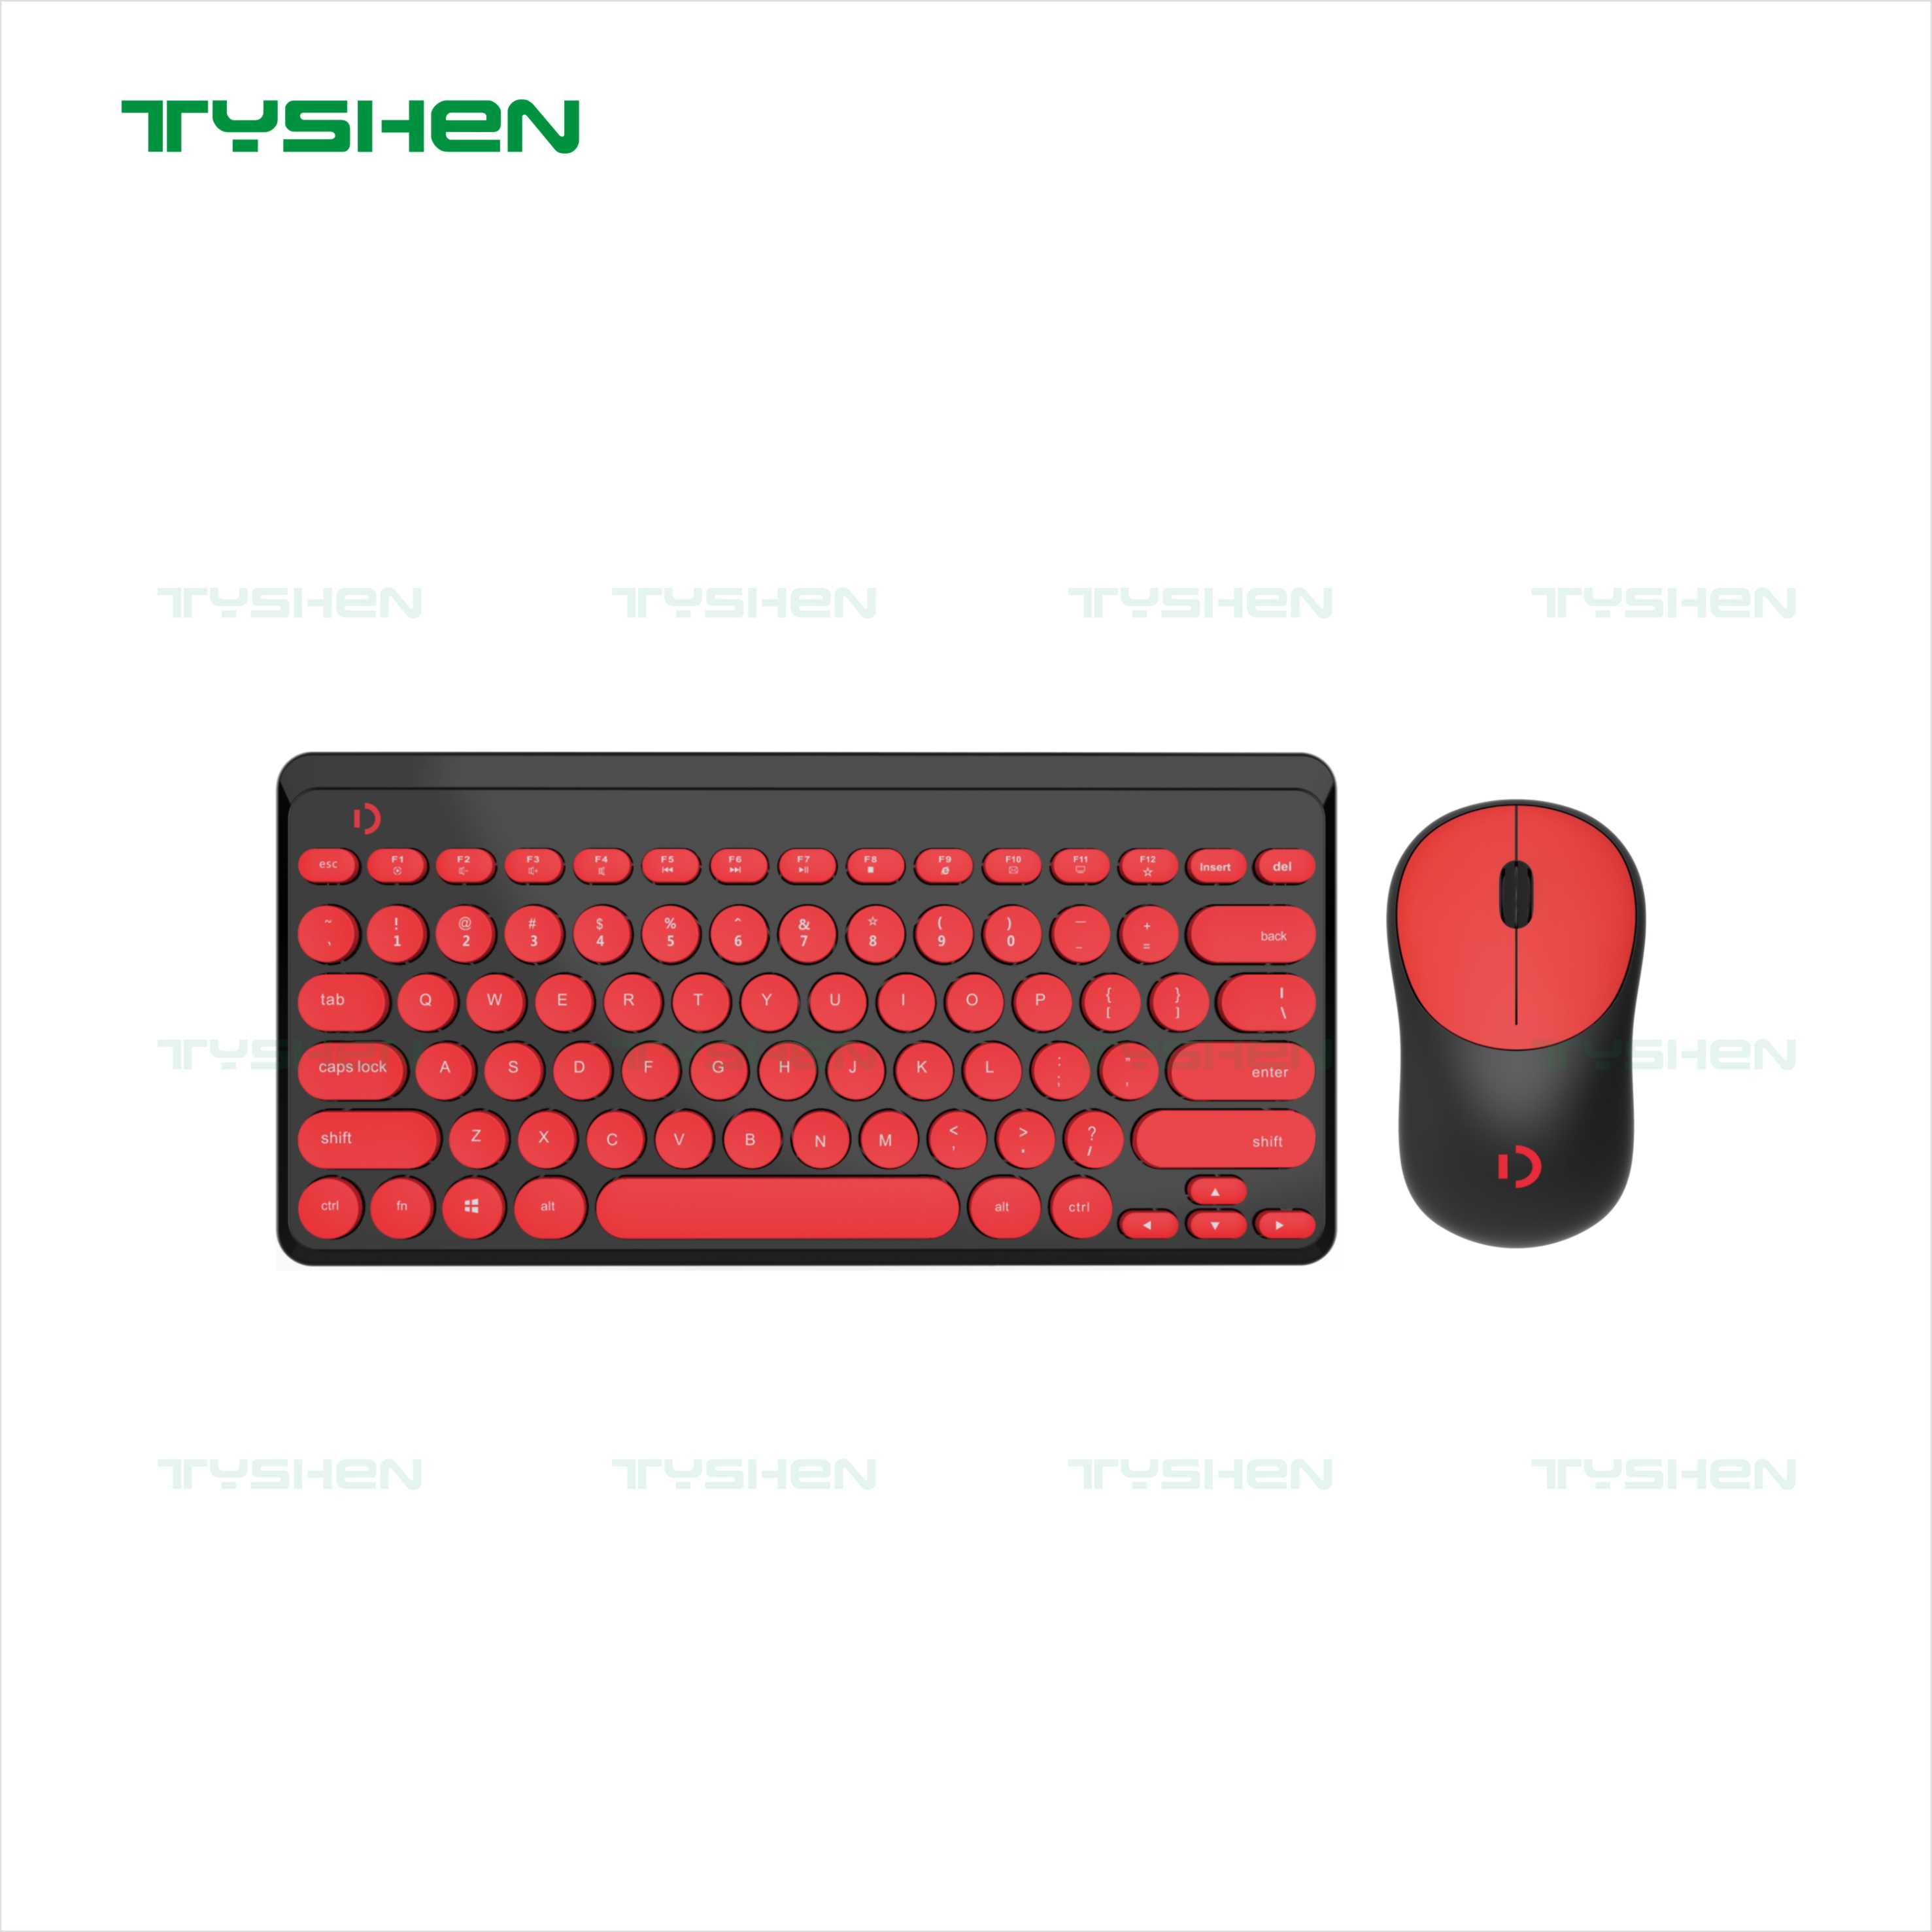 Quiet and Comfortable 2.4G Wireless Keyboard and Mouse Combo, Suitable for Business Office, Laptop